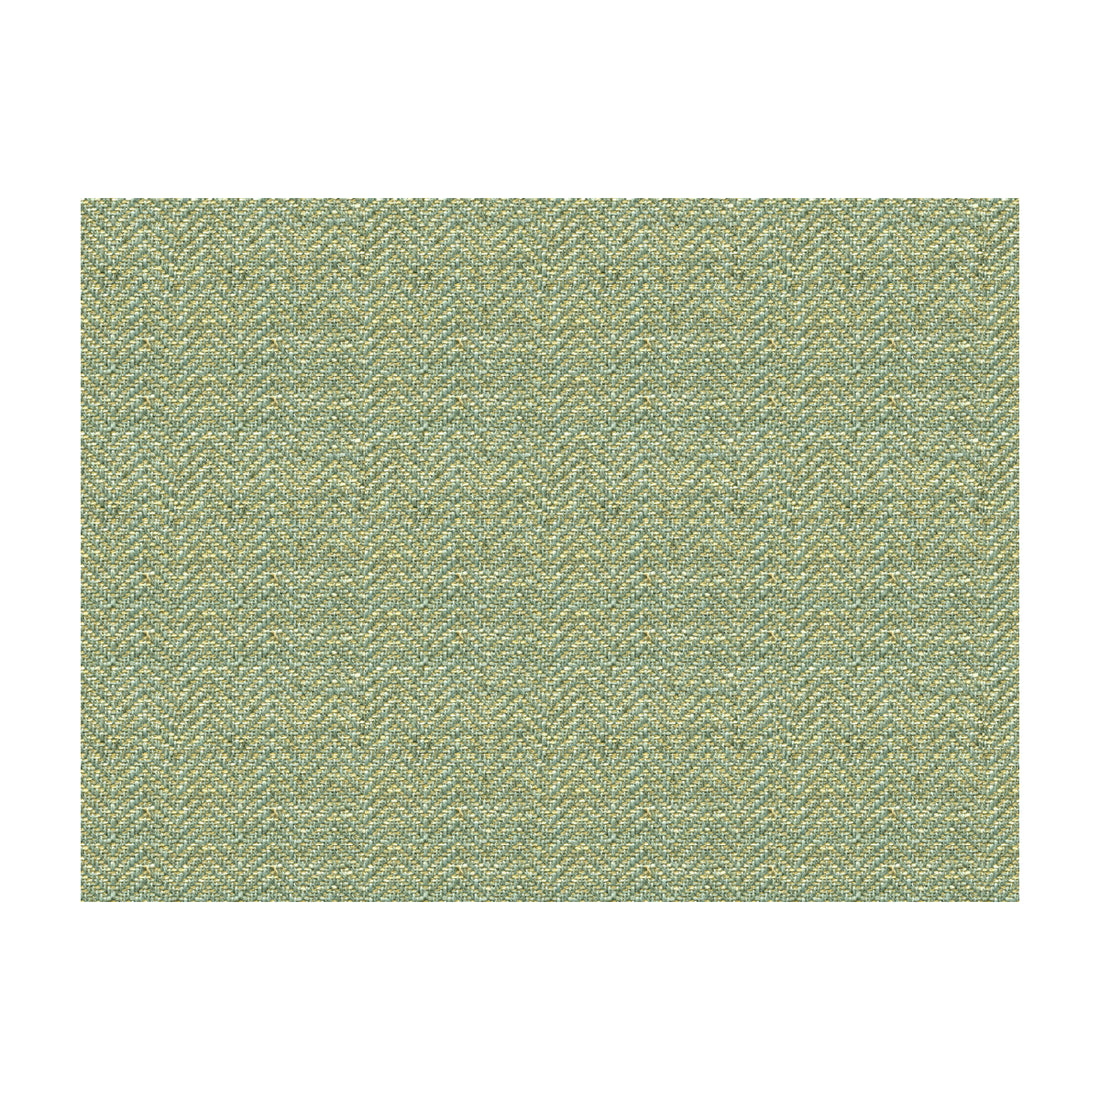 Keep True fabric in horizon color - pattern 28881.1635.0 - by Kravet Couture in the Modern Colors II collection